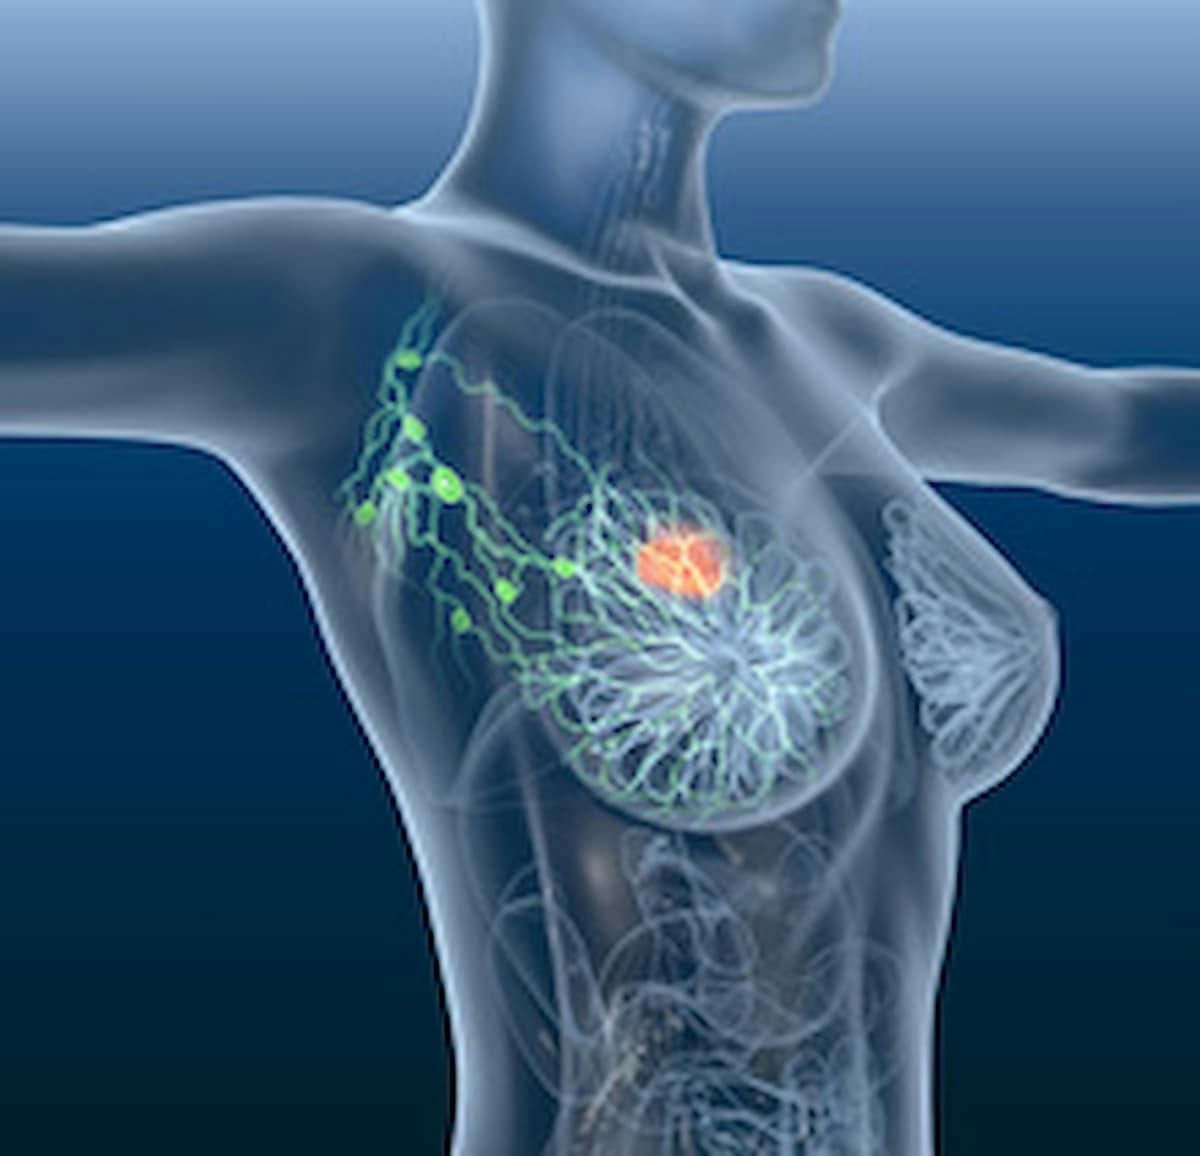 Data from the phase 2 TRIO-US B-12 TALENT trial indicate that fam-trastuzumab deruxtecan-nkxi in the neoadjuvant setting with or without endocrine therapy could be beneficial for patients with hormone receptor–positive, HER2-low breast cancer.